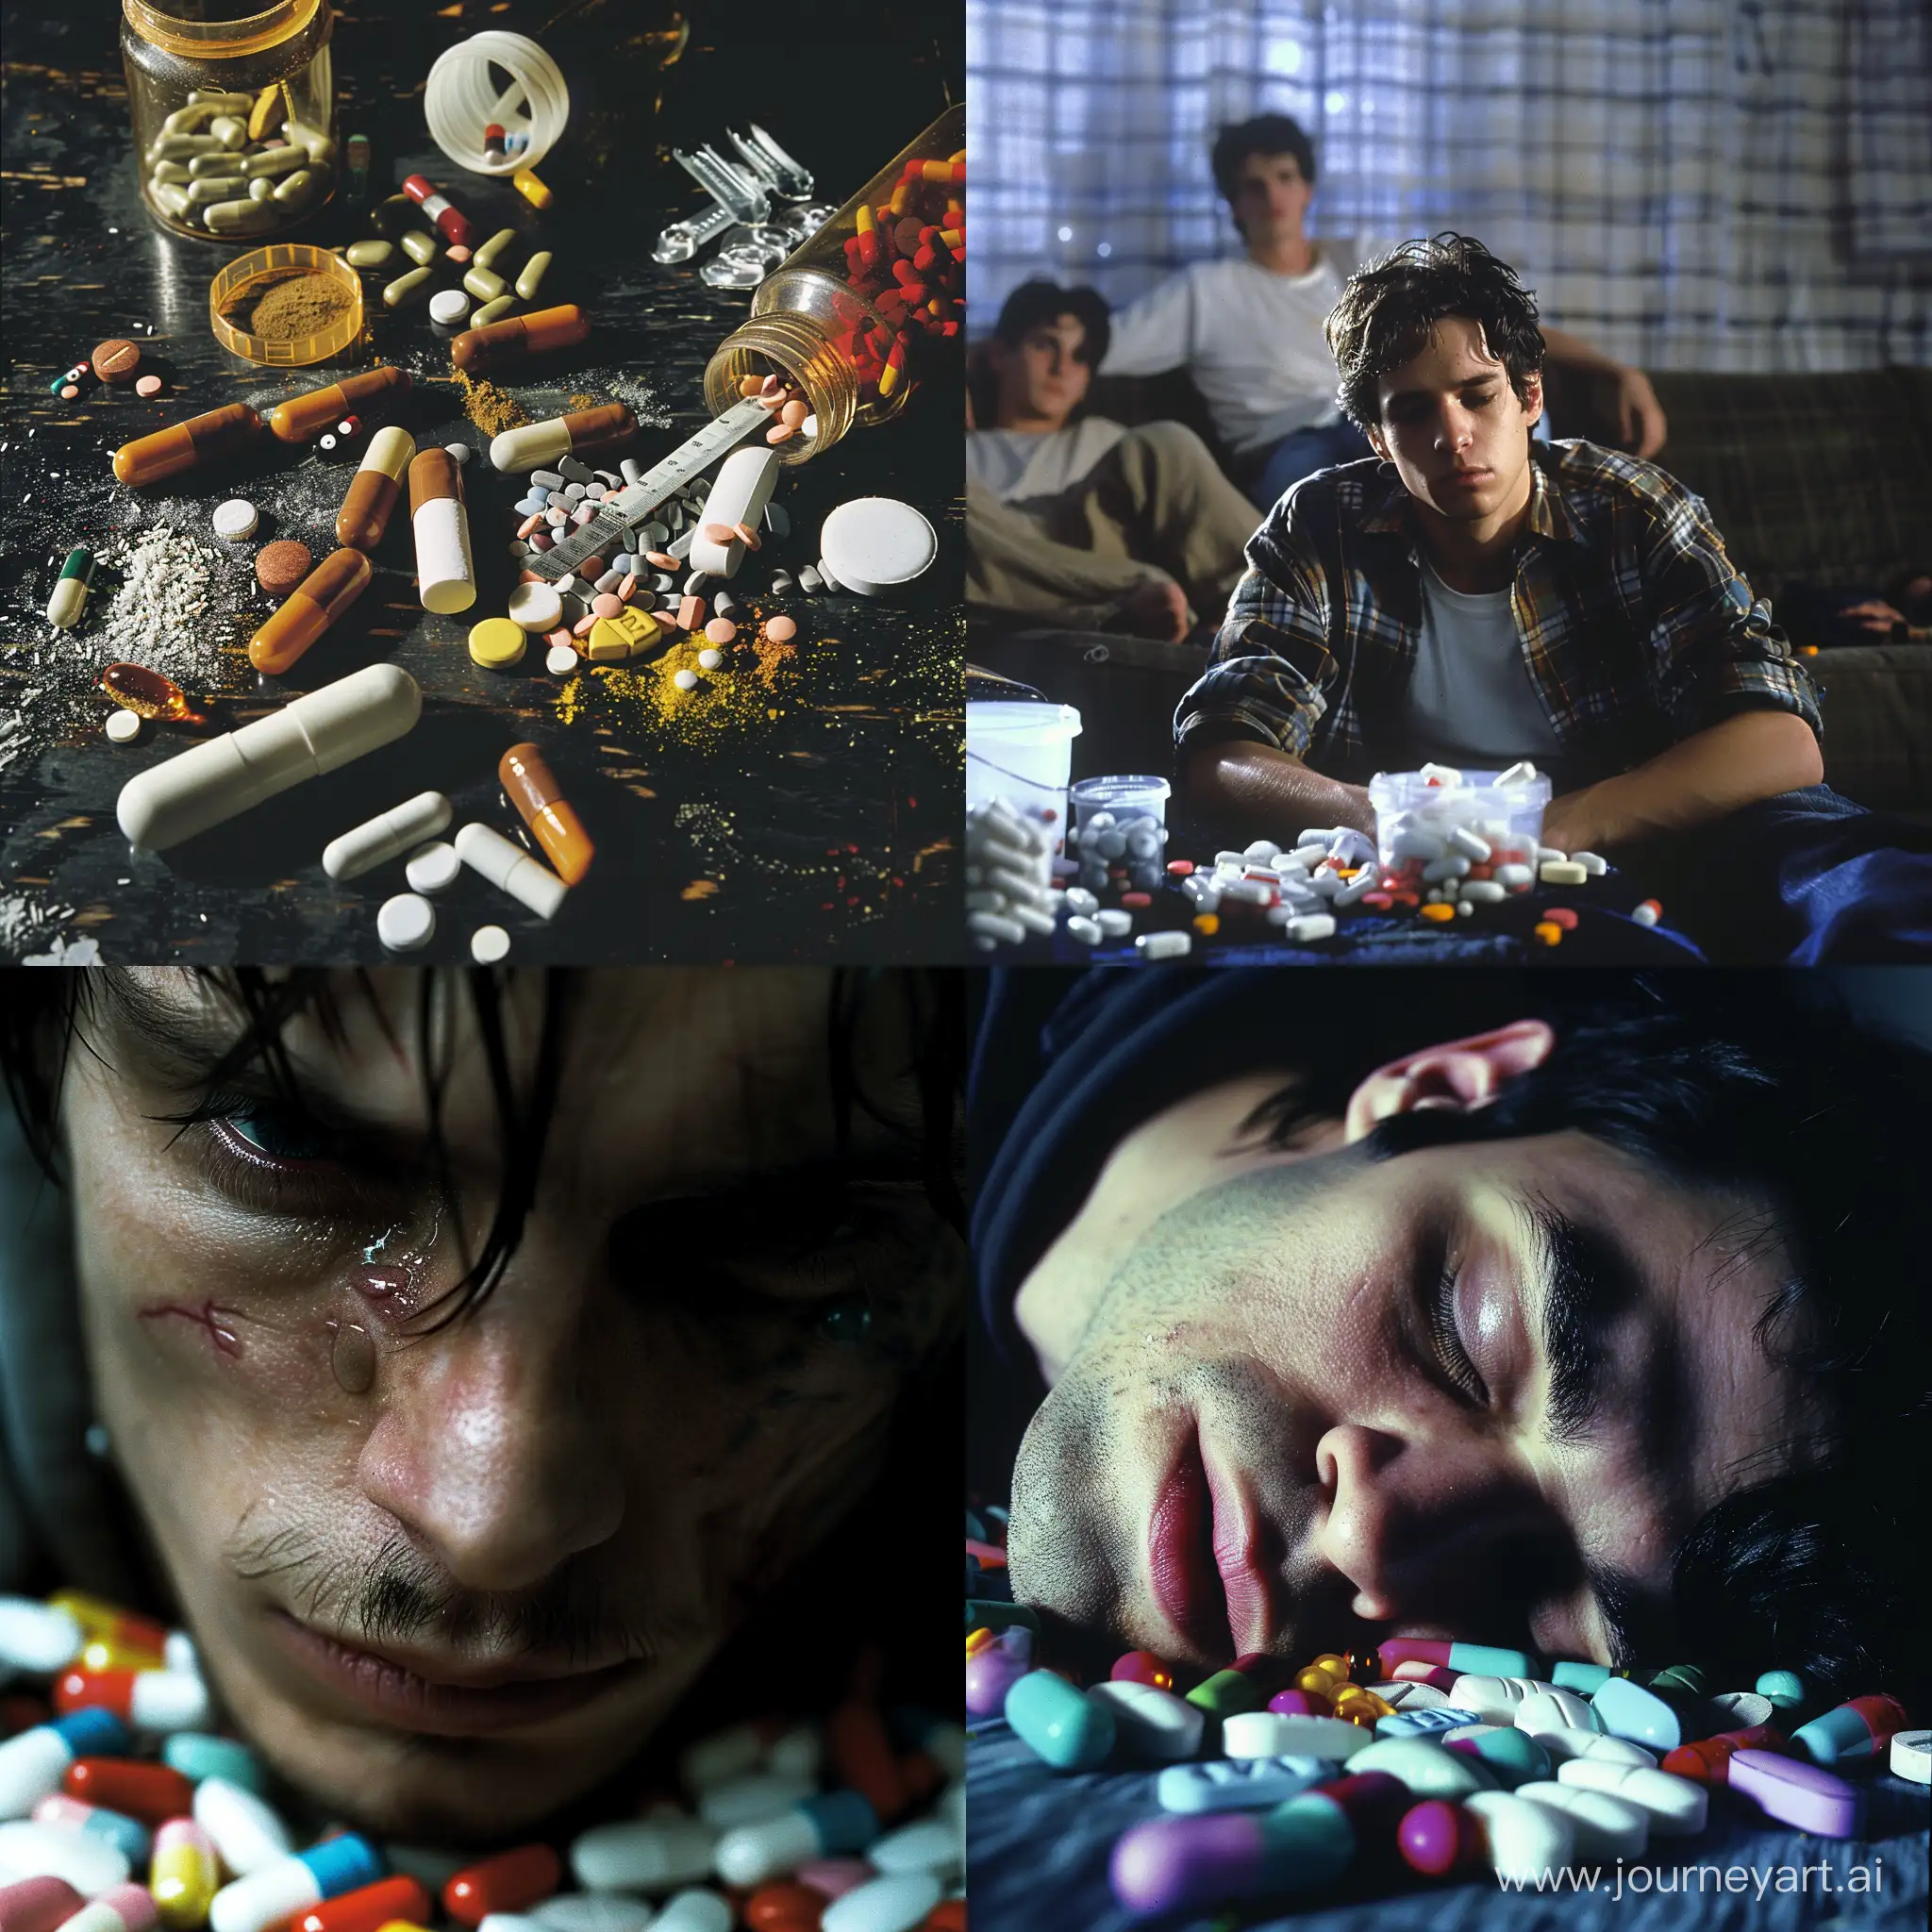 The-Impact-of-Drugs-on-Modern-Society-A-Cinematic-Perspective